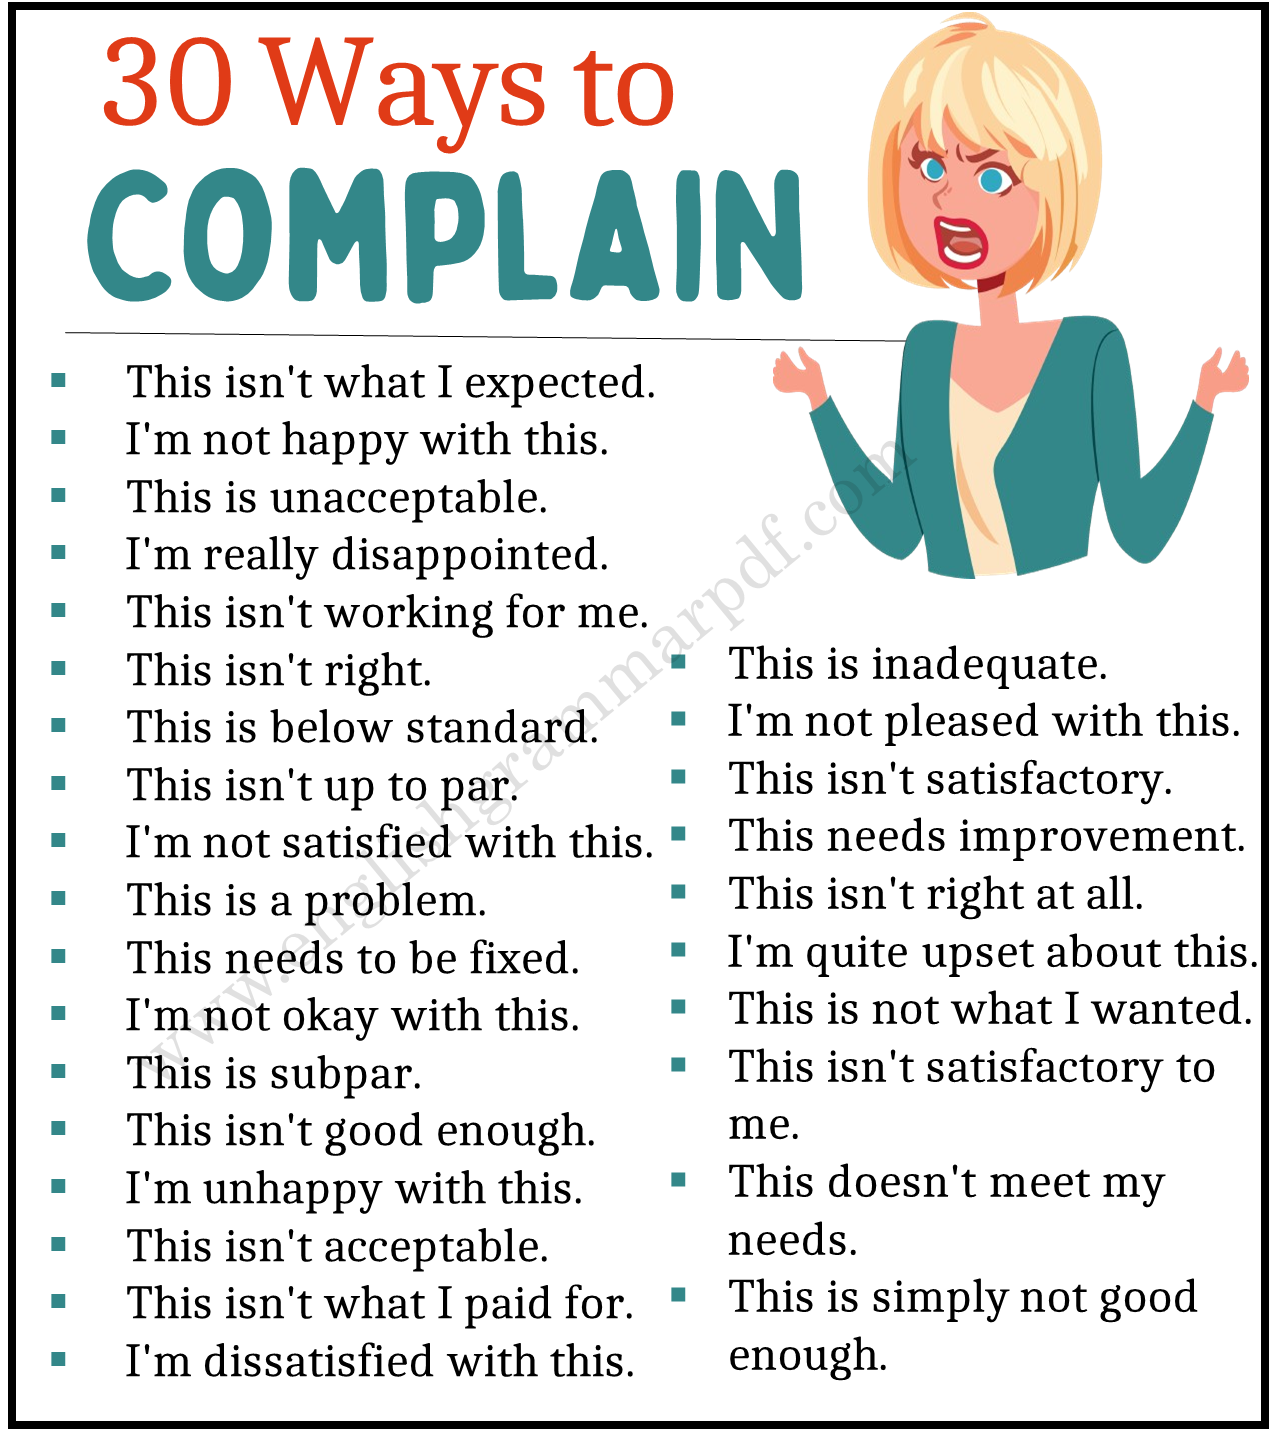 Ways to Complain in English